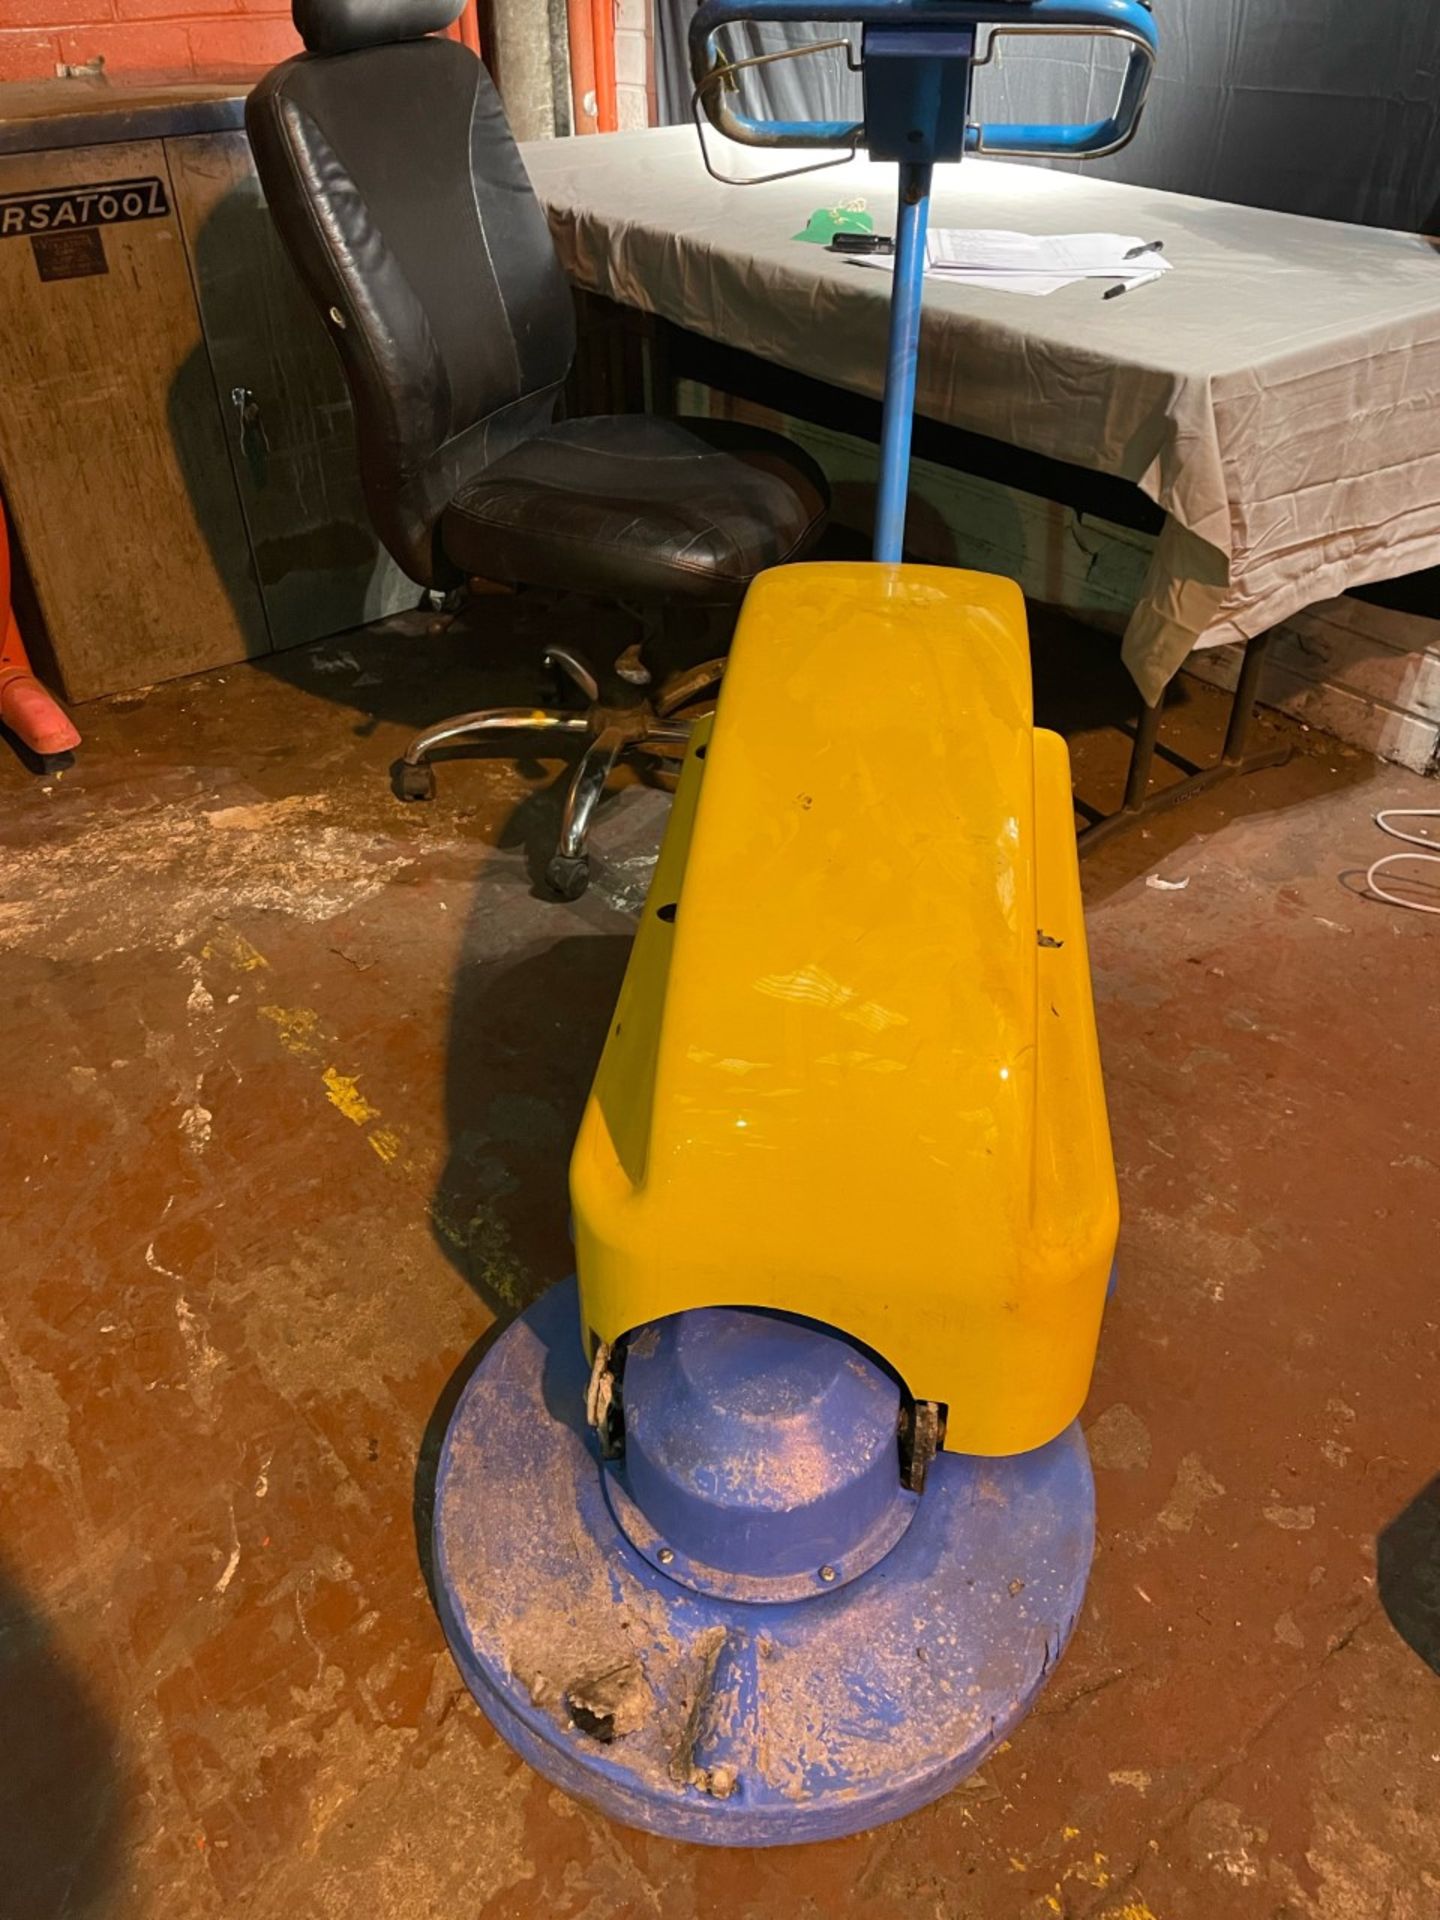 Tennent challenger nippy 500. 18v floor scrubber for all hard floors. Spares or repair.